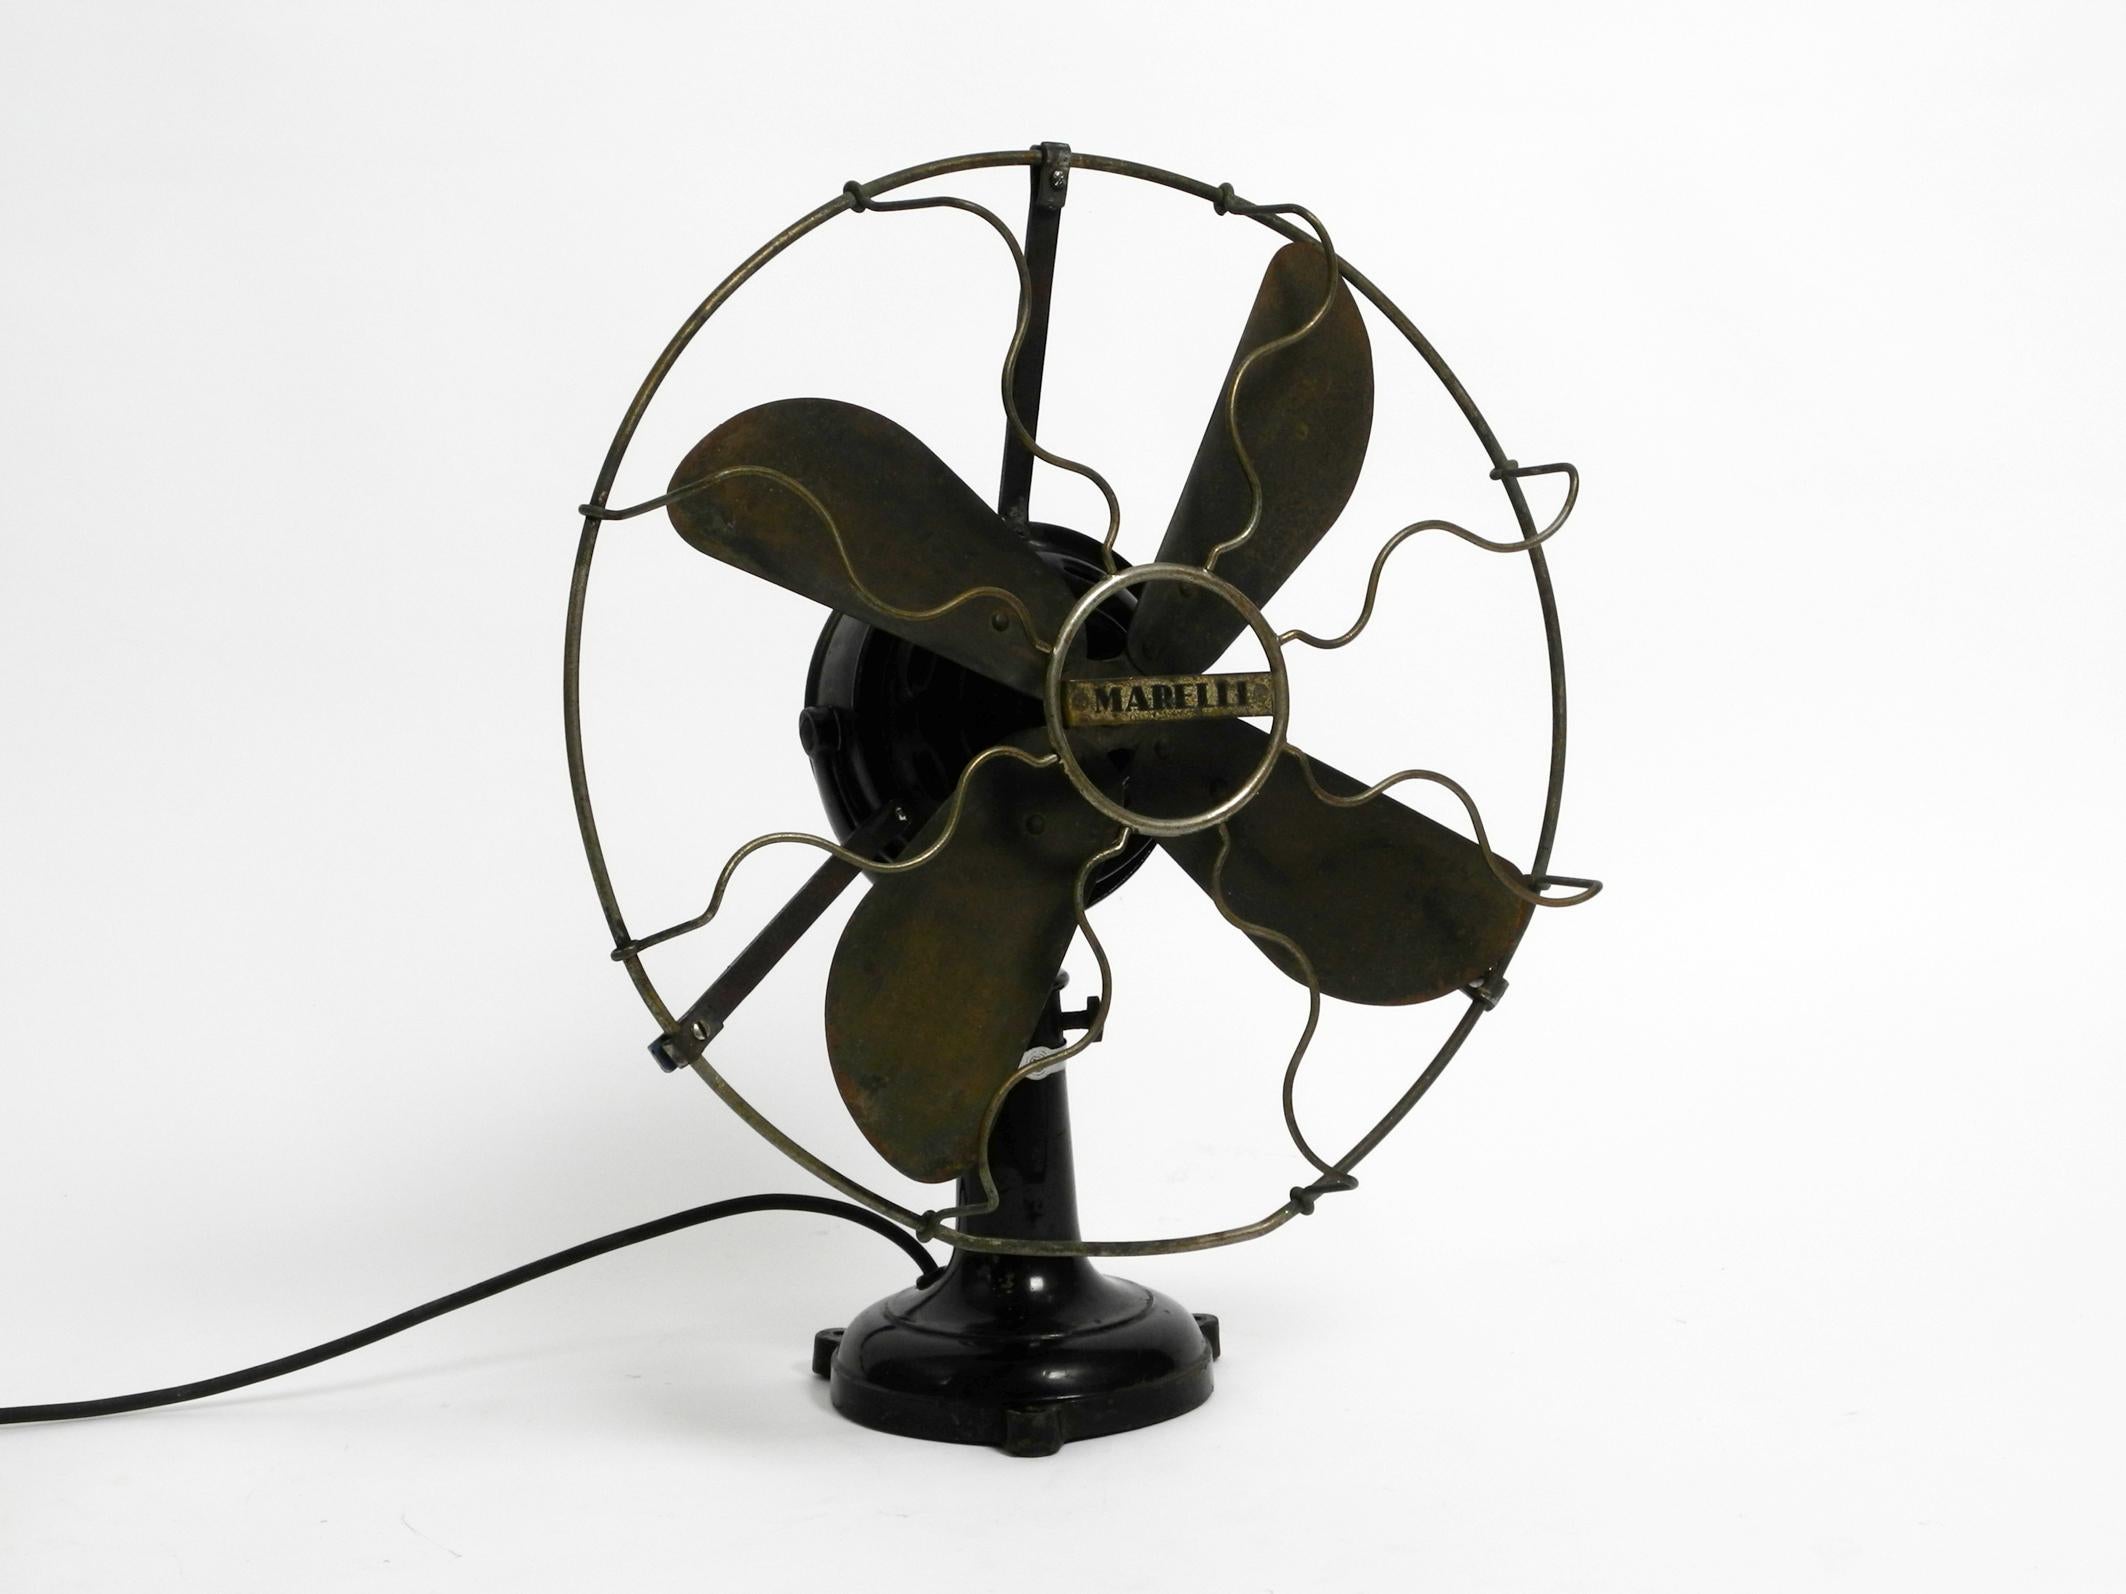 Huge Heavy Original 1930s Industrial Metal Table Fan by Marelli Made in Italy 10